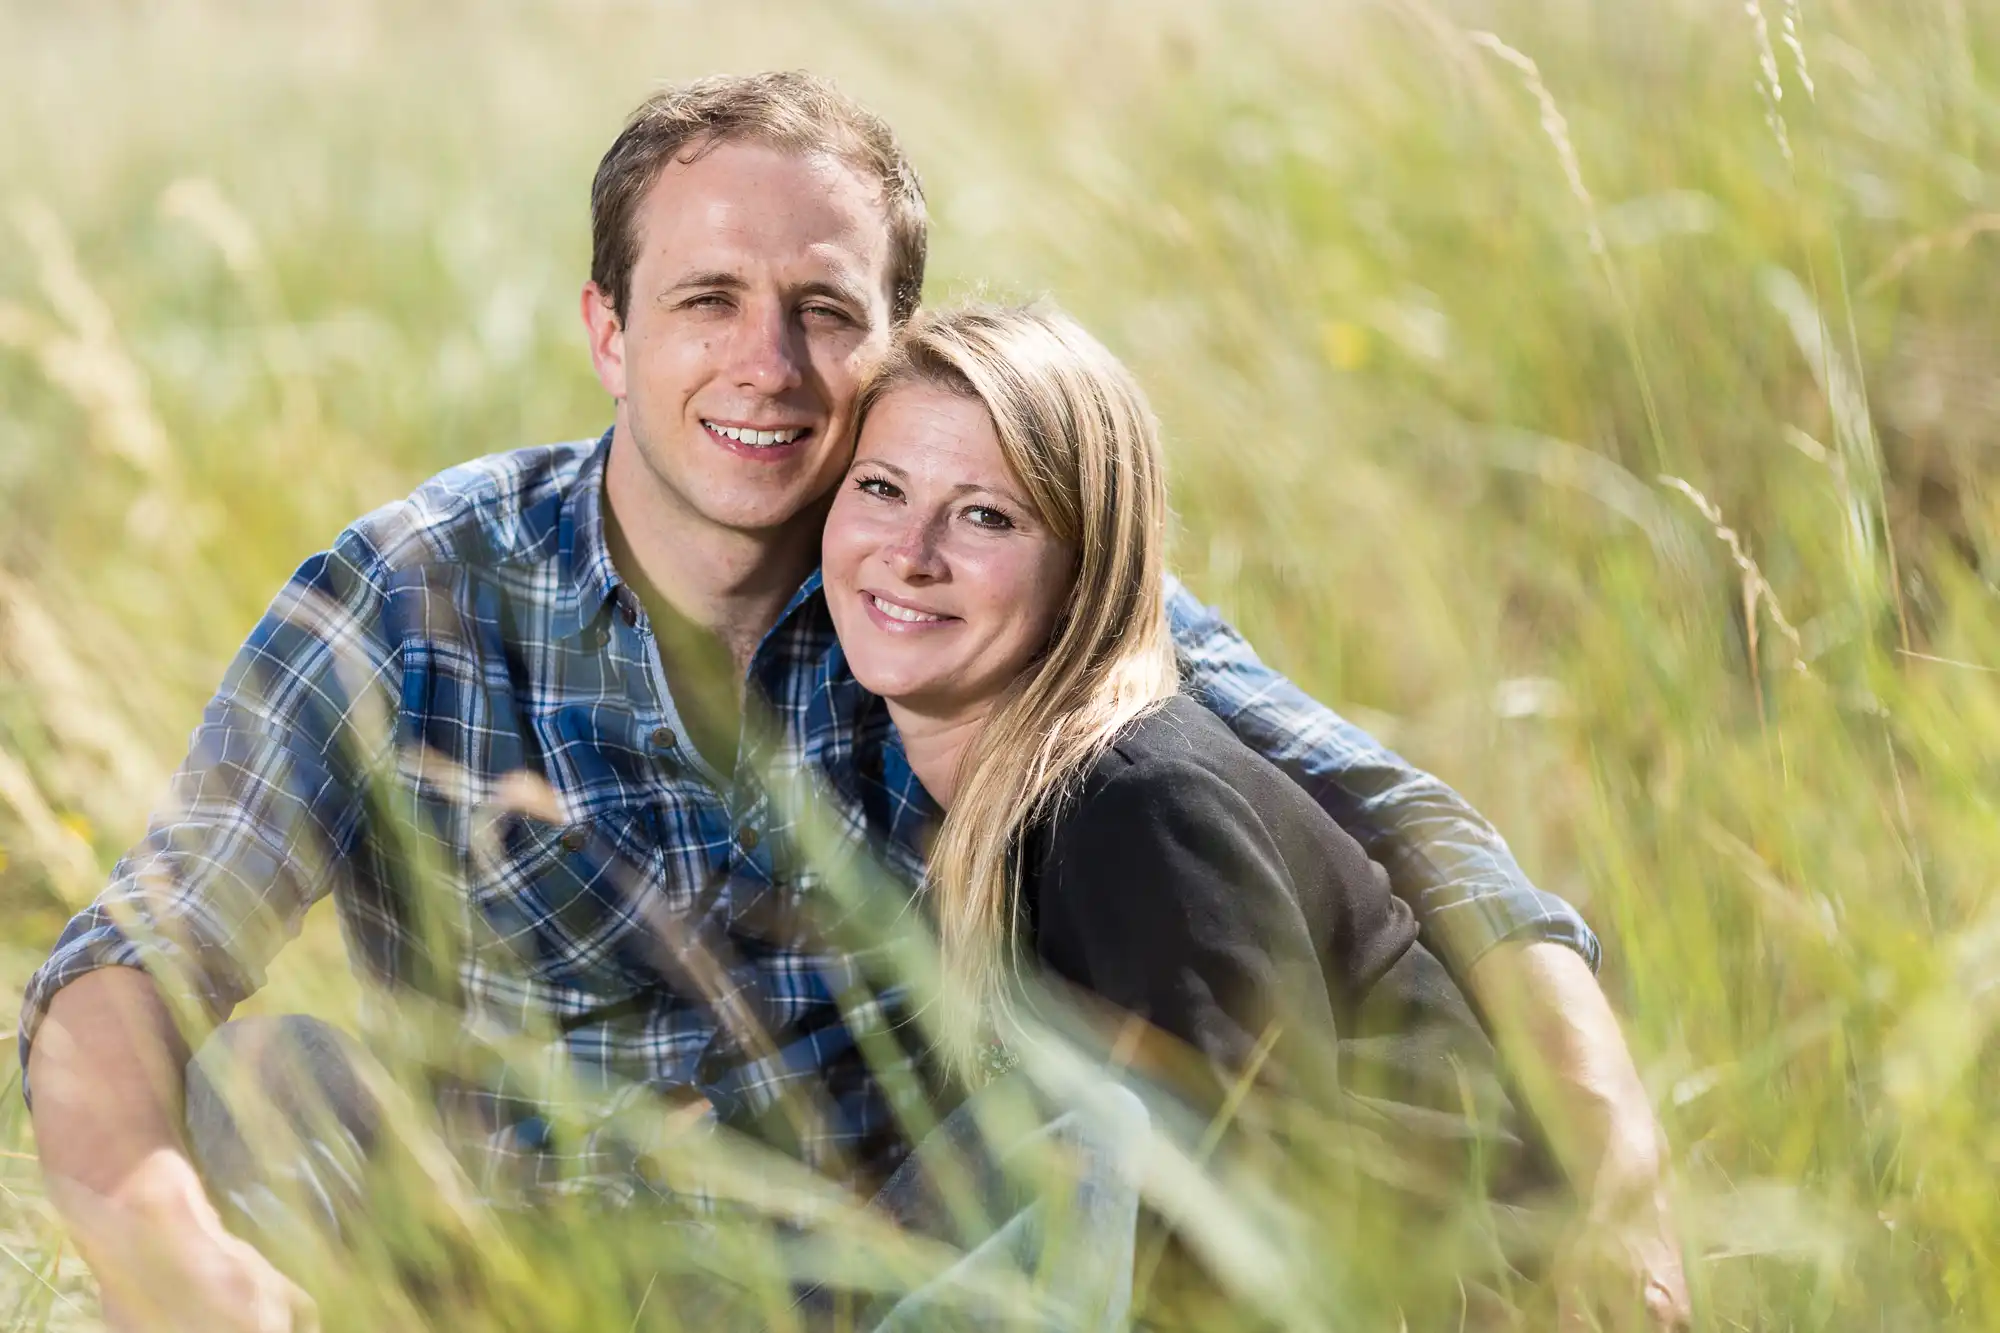 A couple smiling and embracing in a sunny meadow, surrounded by tall grass.